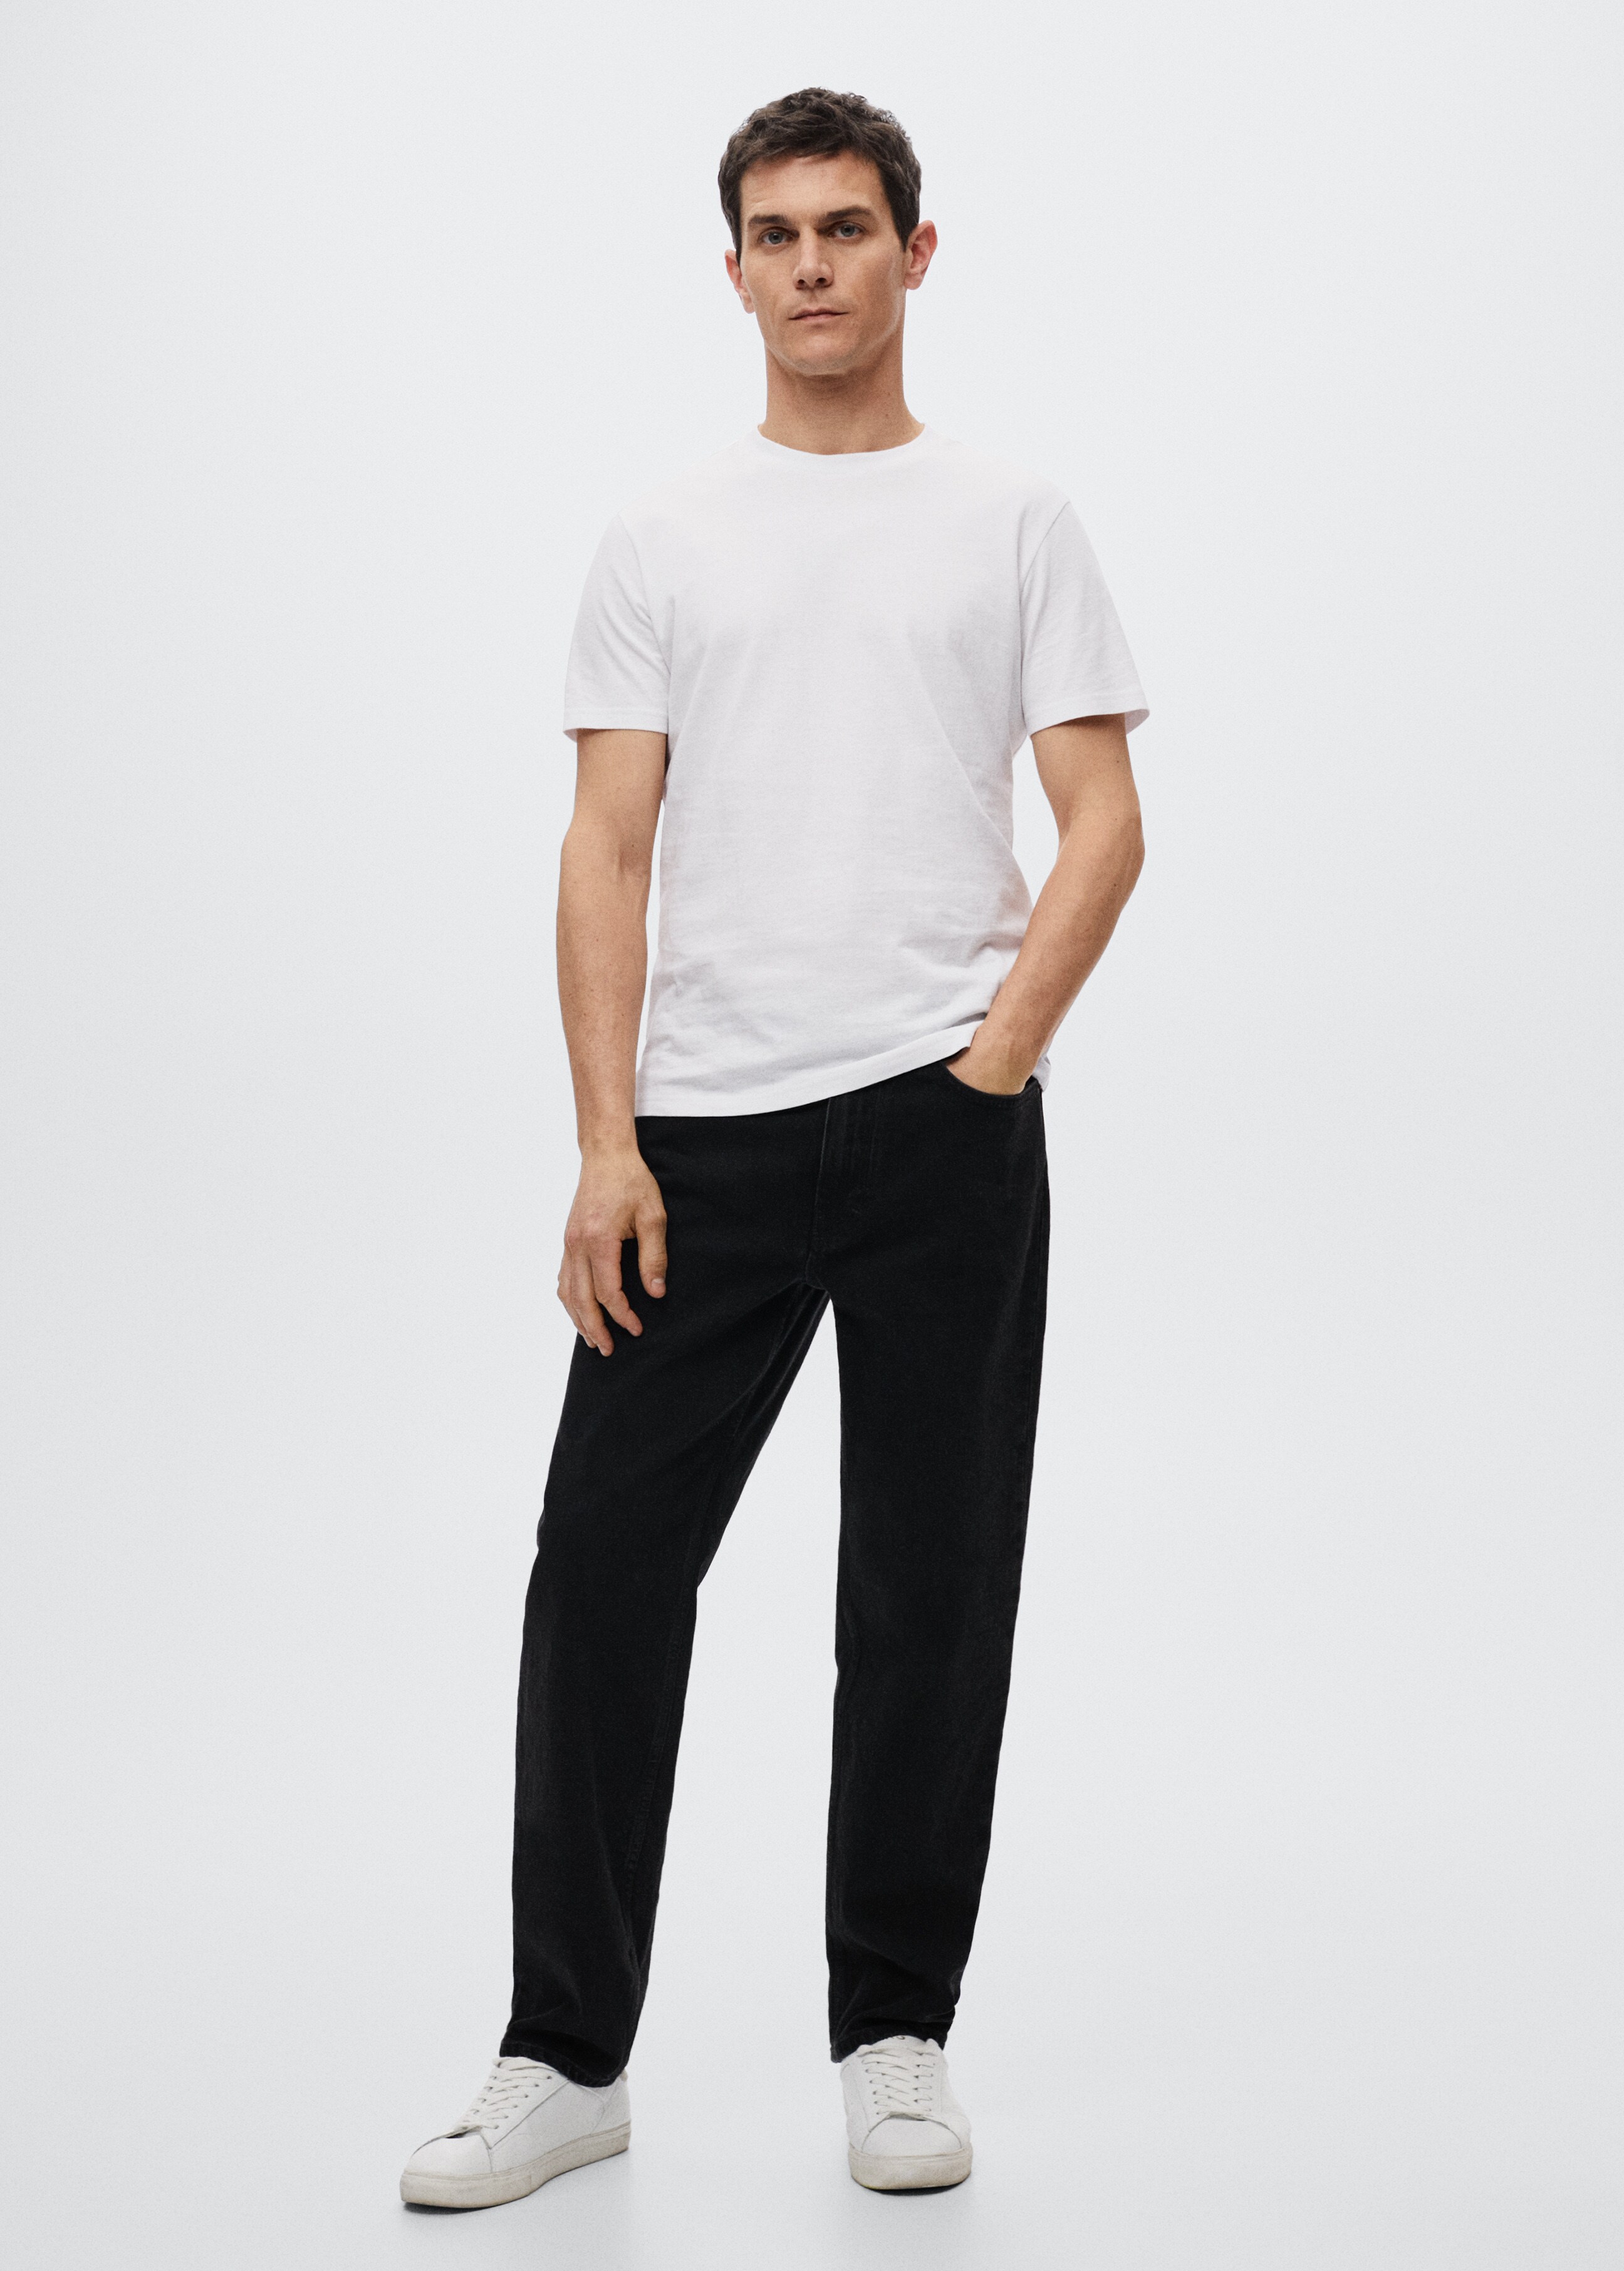 Basic lightweight cotton t-shirt - Details of the article 2